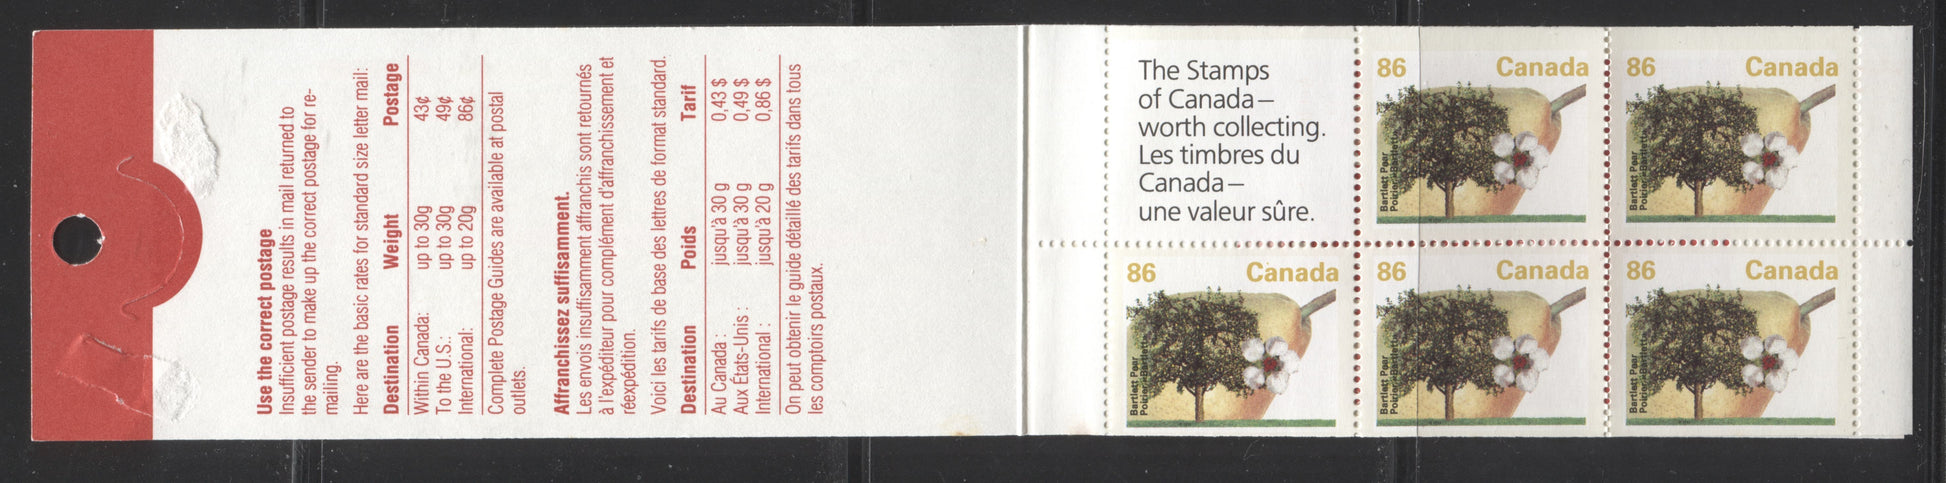 Canada #BK157a-d 1991-1998 Fruit and Flag Definitive Issue, Complete $4.30 Booklet, Coated Papers Paper, Dead Paper, 4 mm GT-4 Tagging Brixton Chrome 